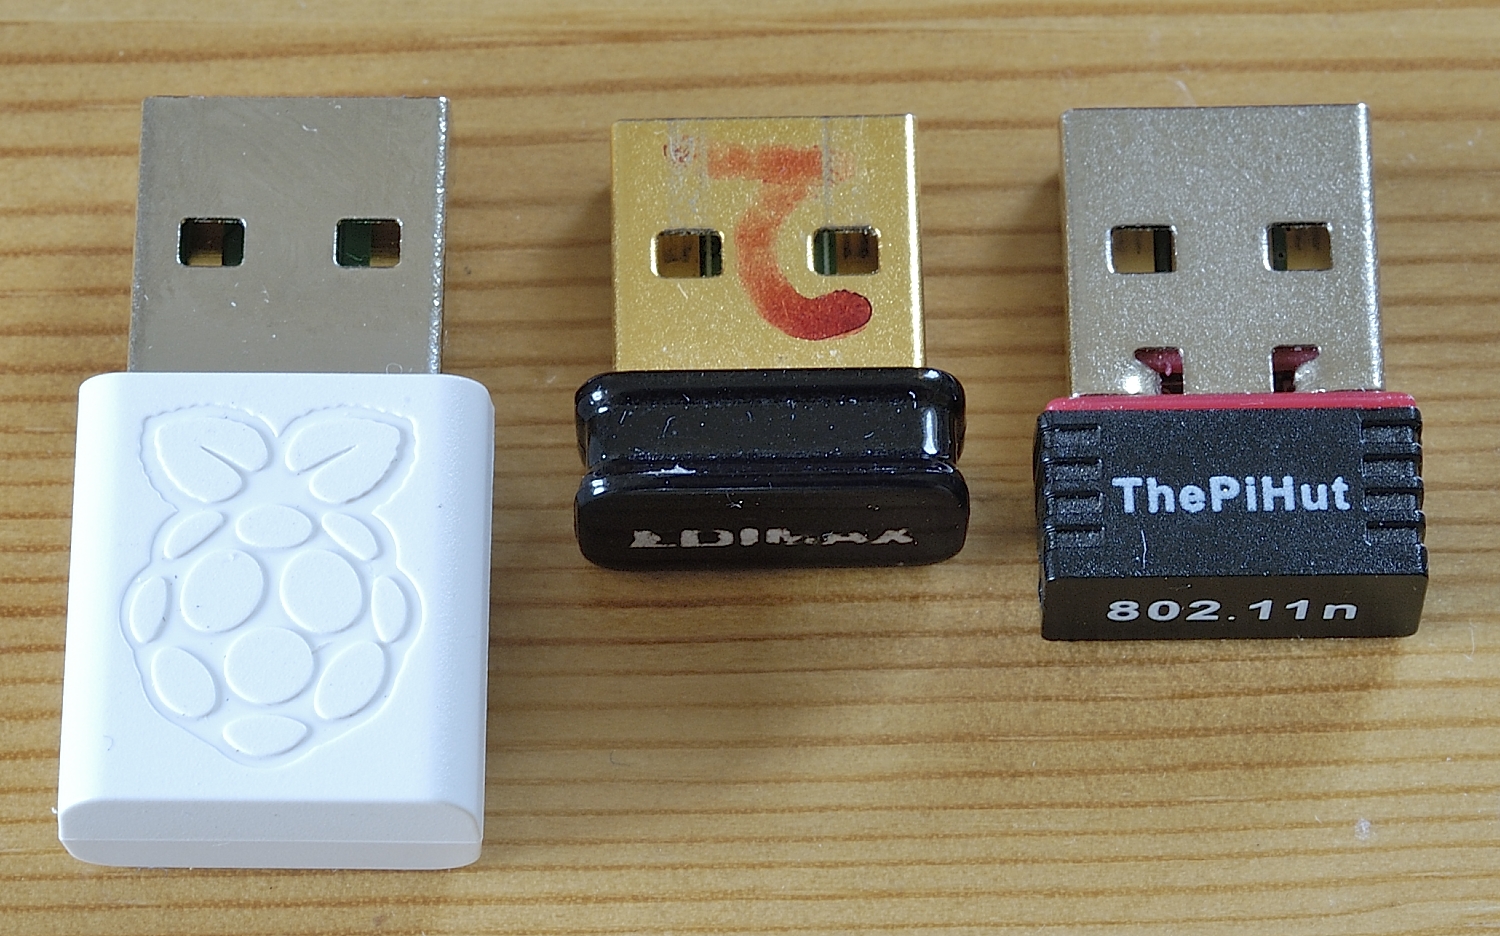 Official Raspberry Pi wifi dongle, Edimax, ThePiHut